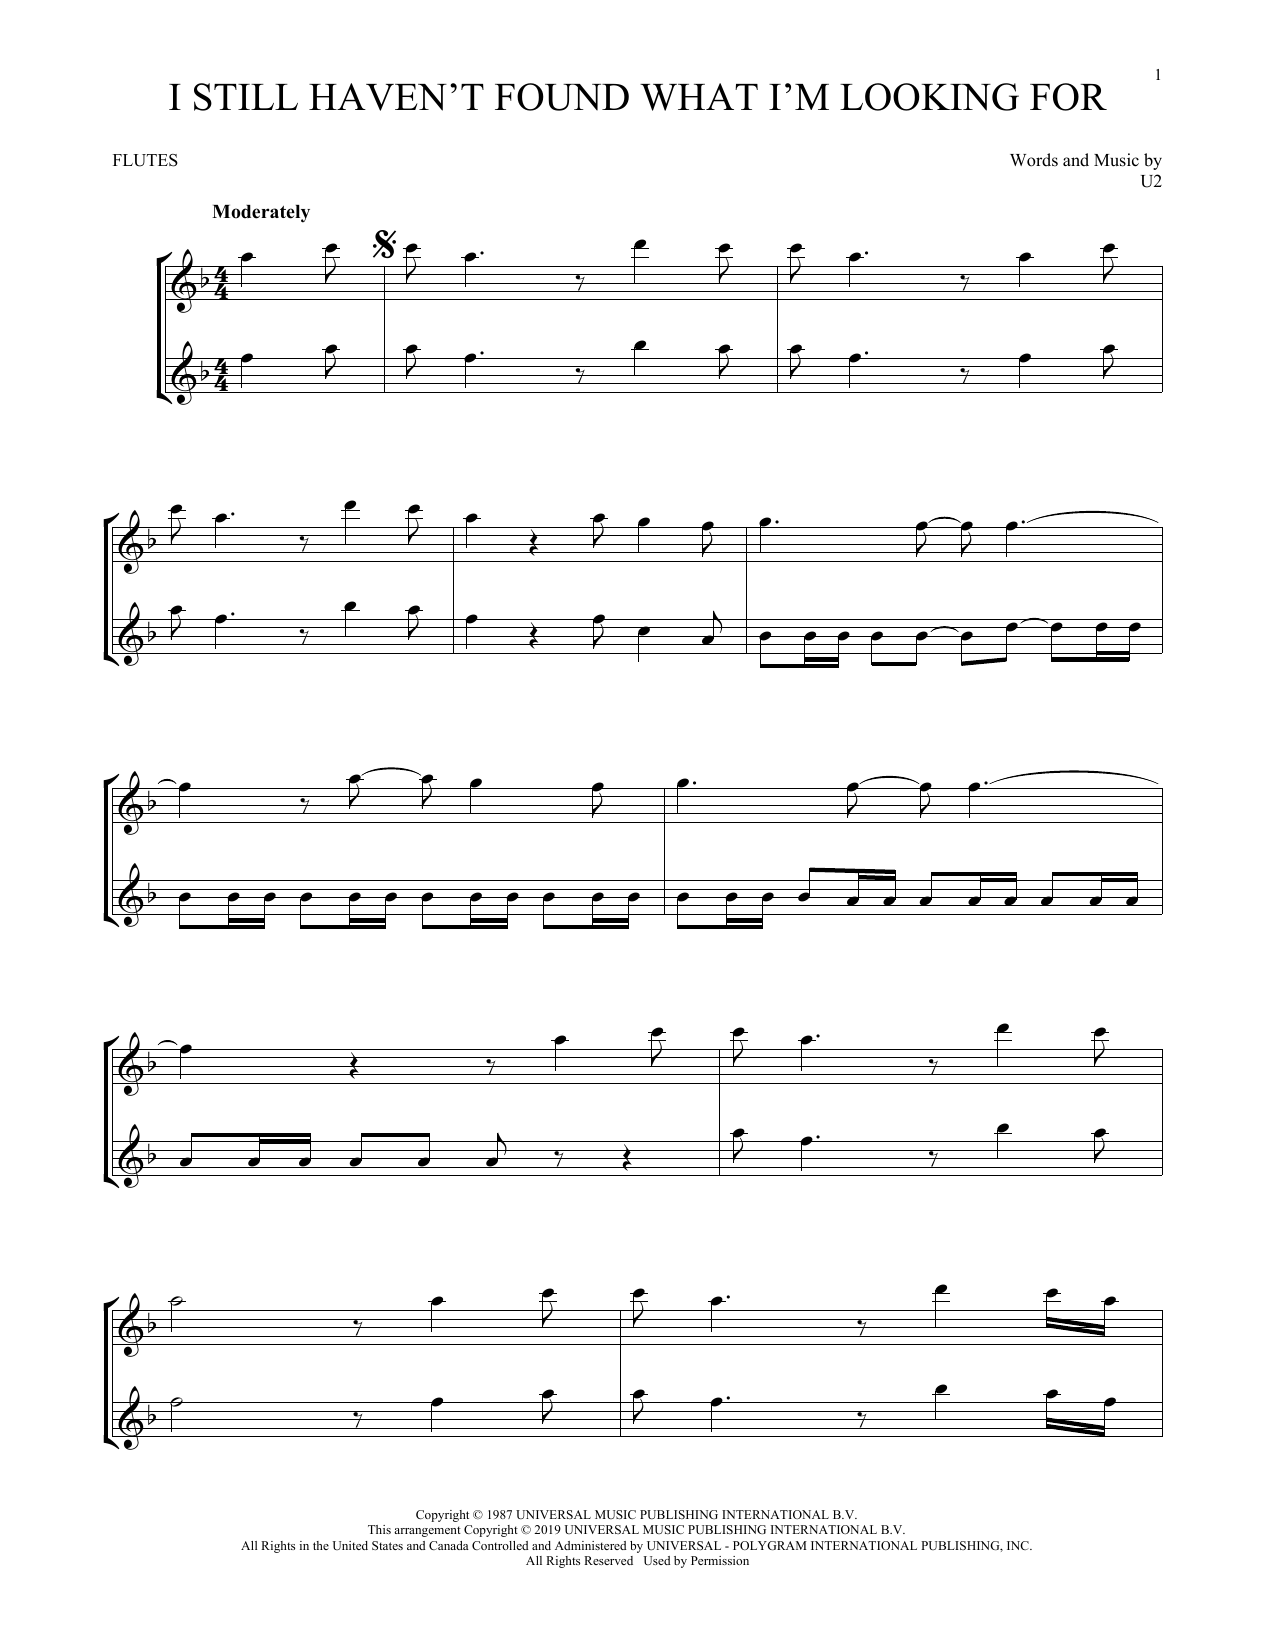 Download U2 I Still Haven't Found What I'm Looking Sheet Music